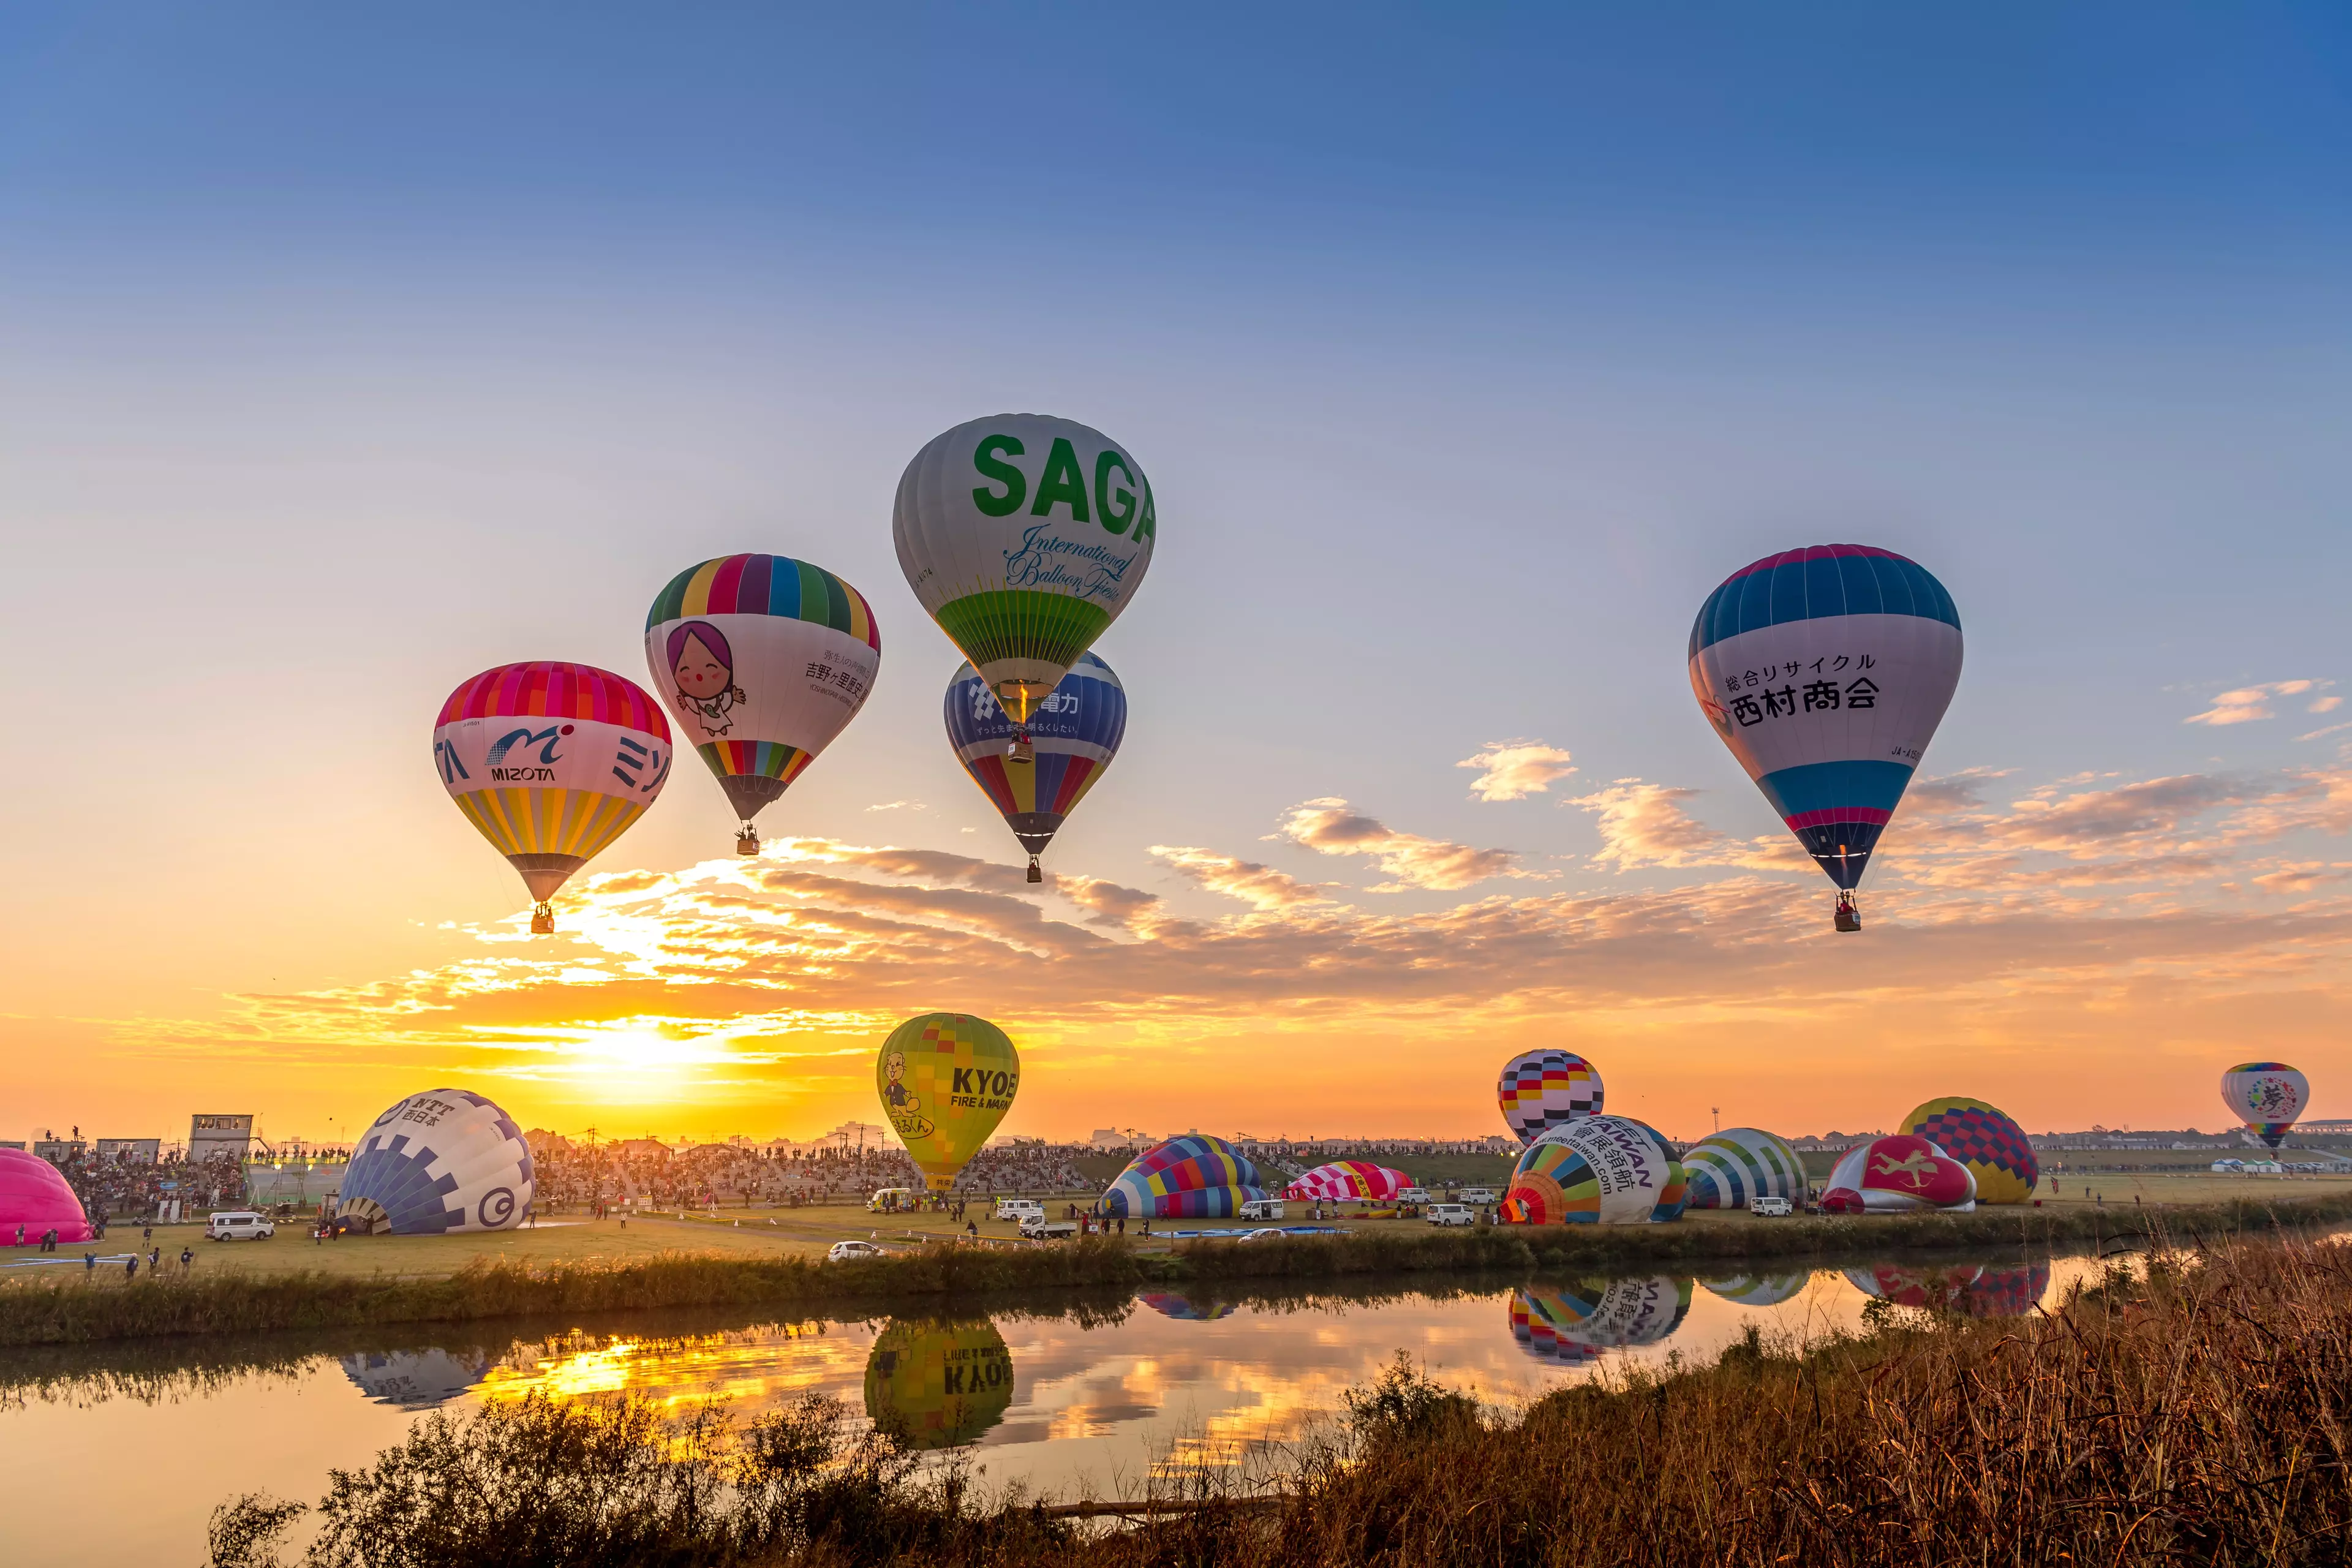 Sights include the jaw-dropping Saga Balloon Festival (